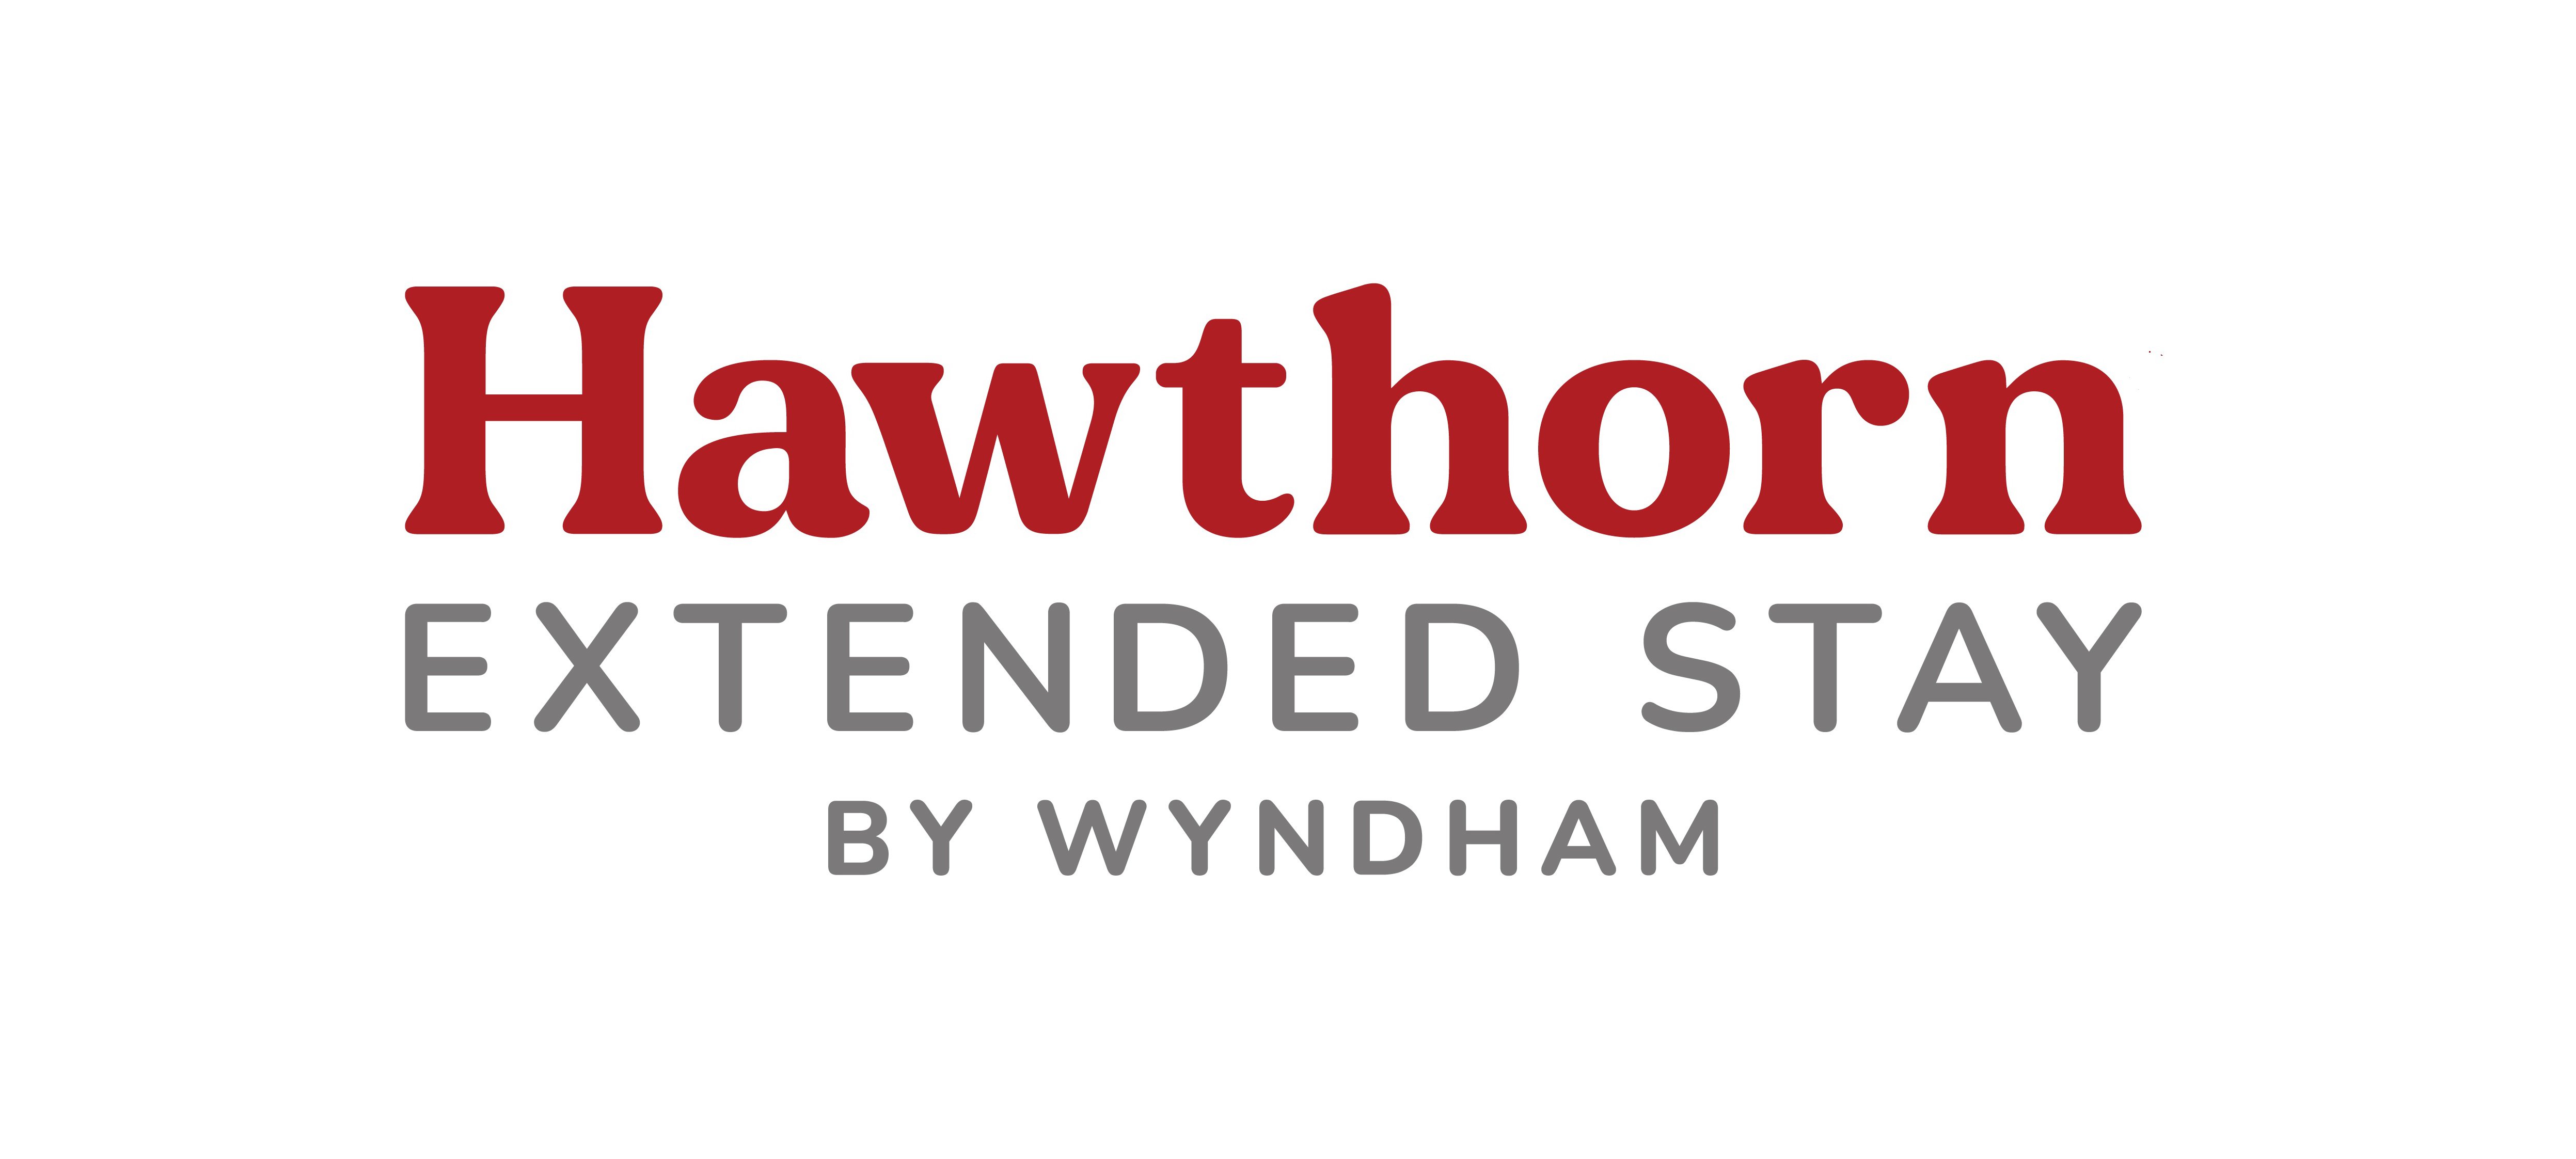  HAWTHORN EXTENDED STAY BY WYNDHAM